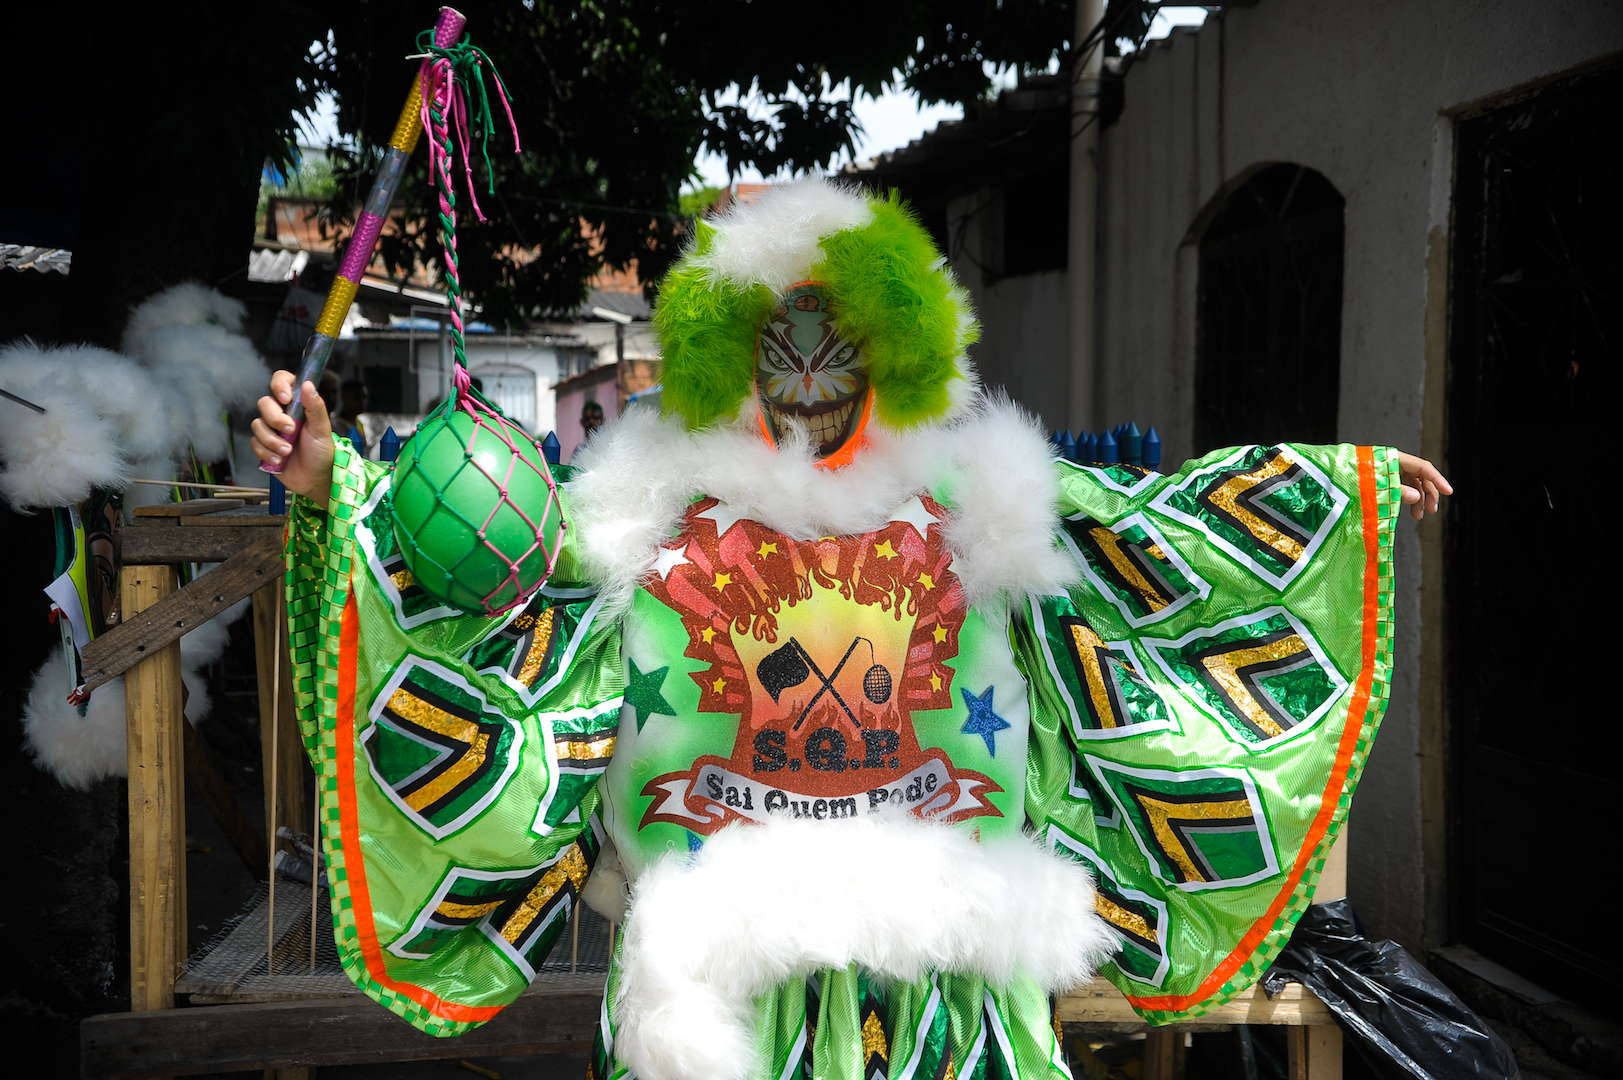 Brazil,There are an estimated 400 to 700 Bate bola groups performing in this year's four-day Carnival festivities.